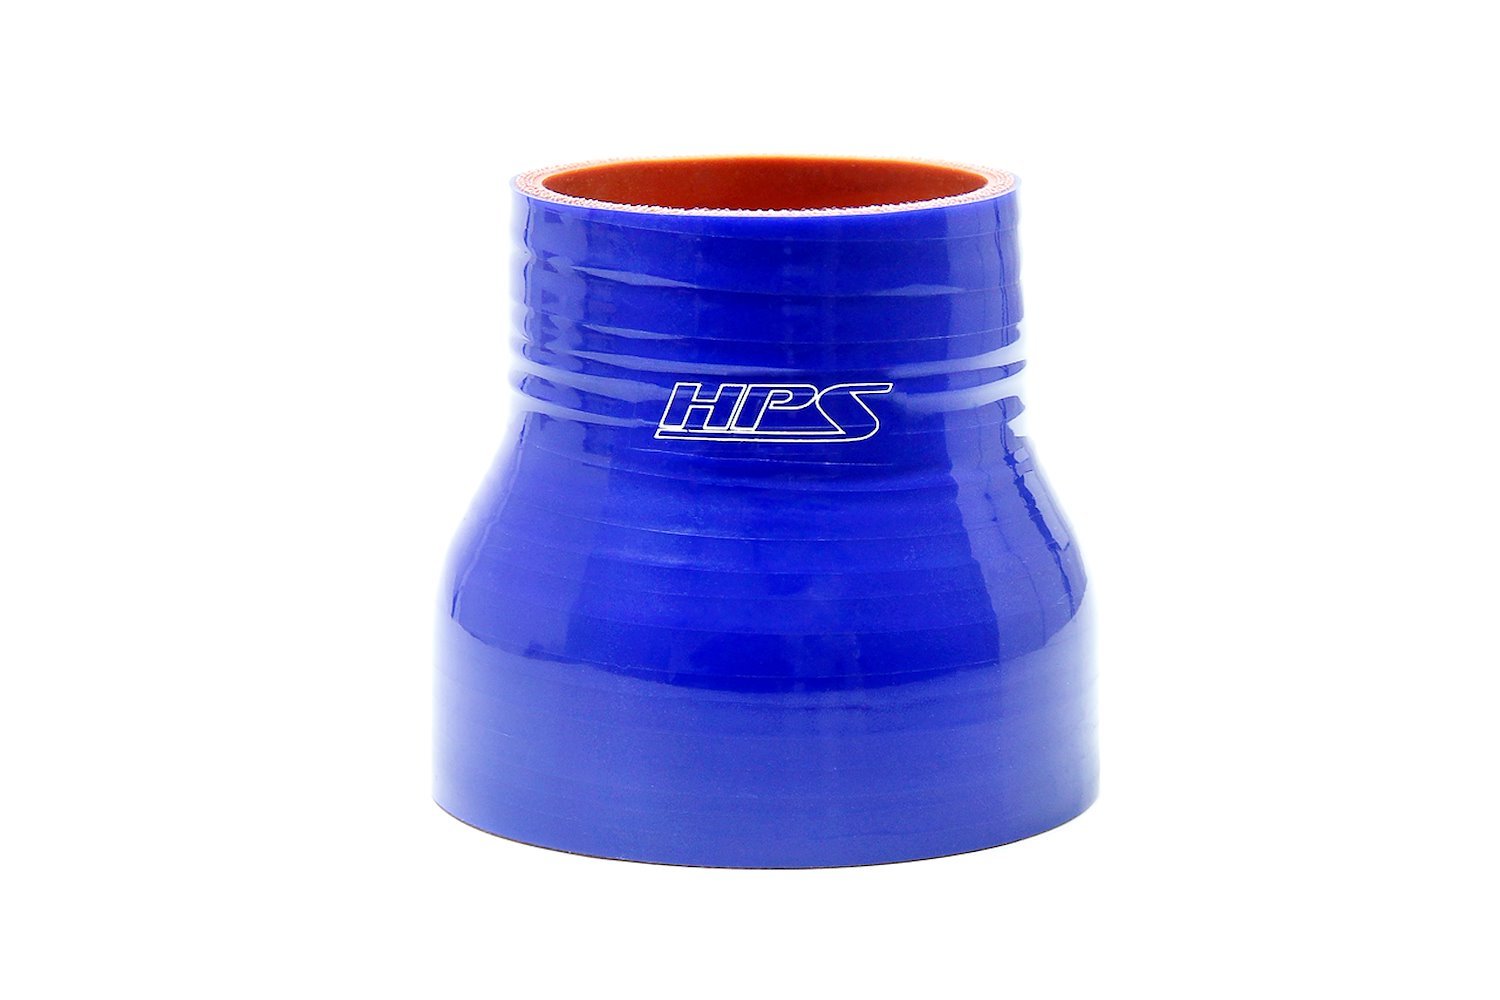 HTSR-200-225-BLUE Silicone Reducer Hose, High-Temp 4-Ply Reinforced, 2 in. - 2-1/4 in. ID, 3 in. Long, Blue